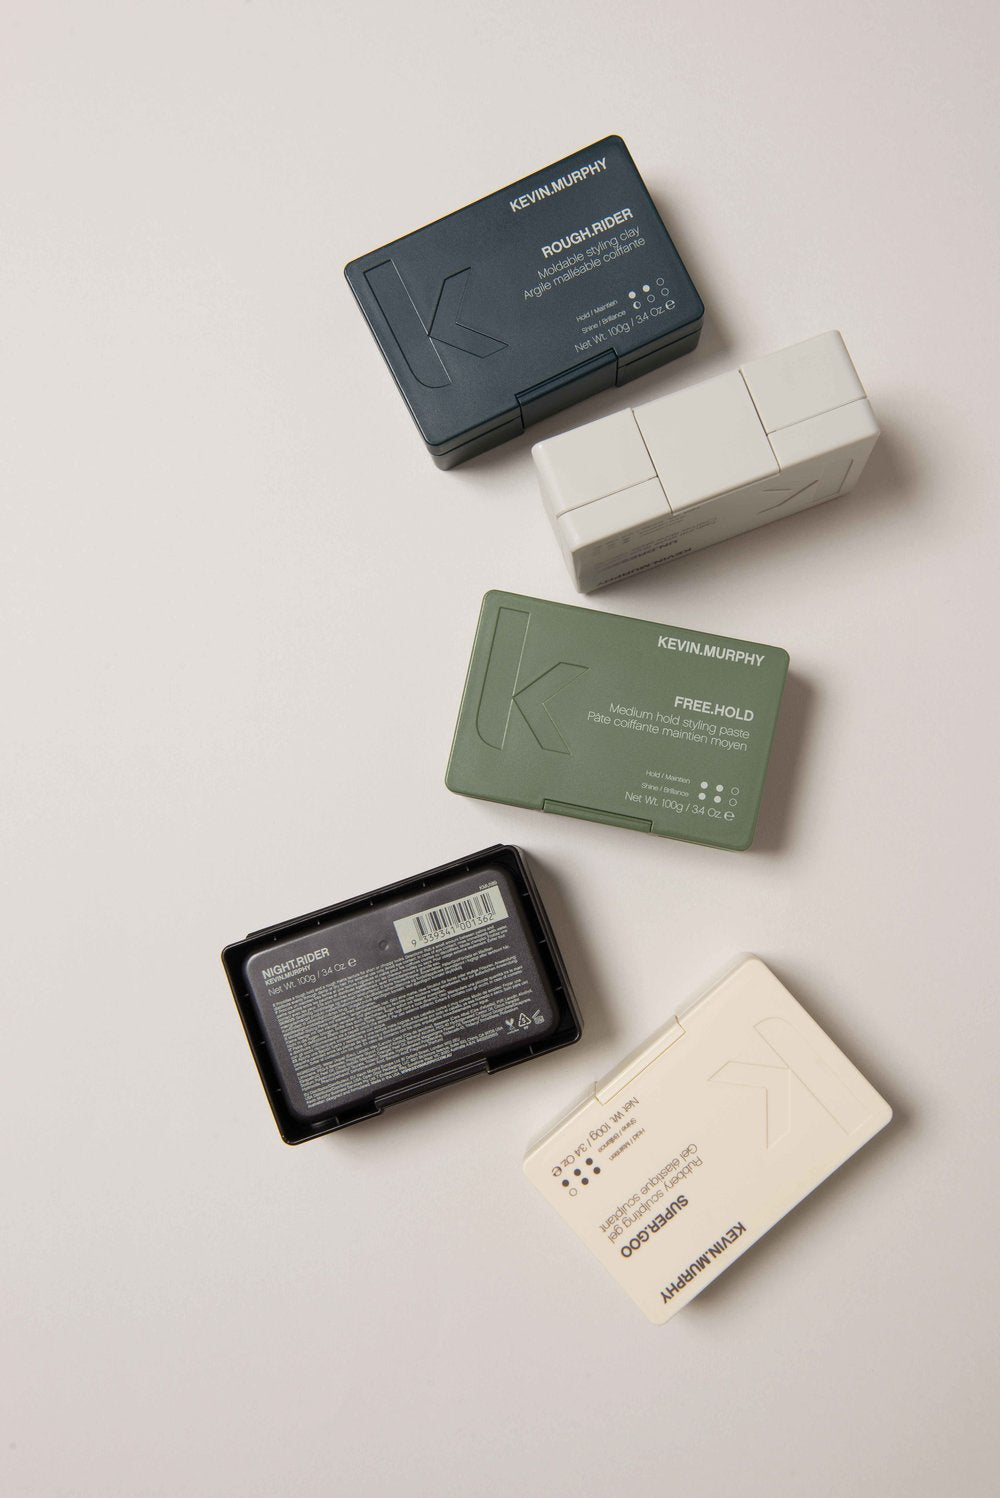 KEVIN.MURPHY - ROUGH.RIDER